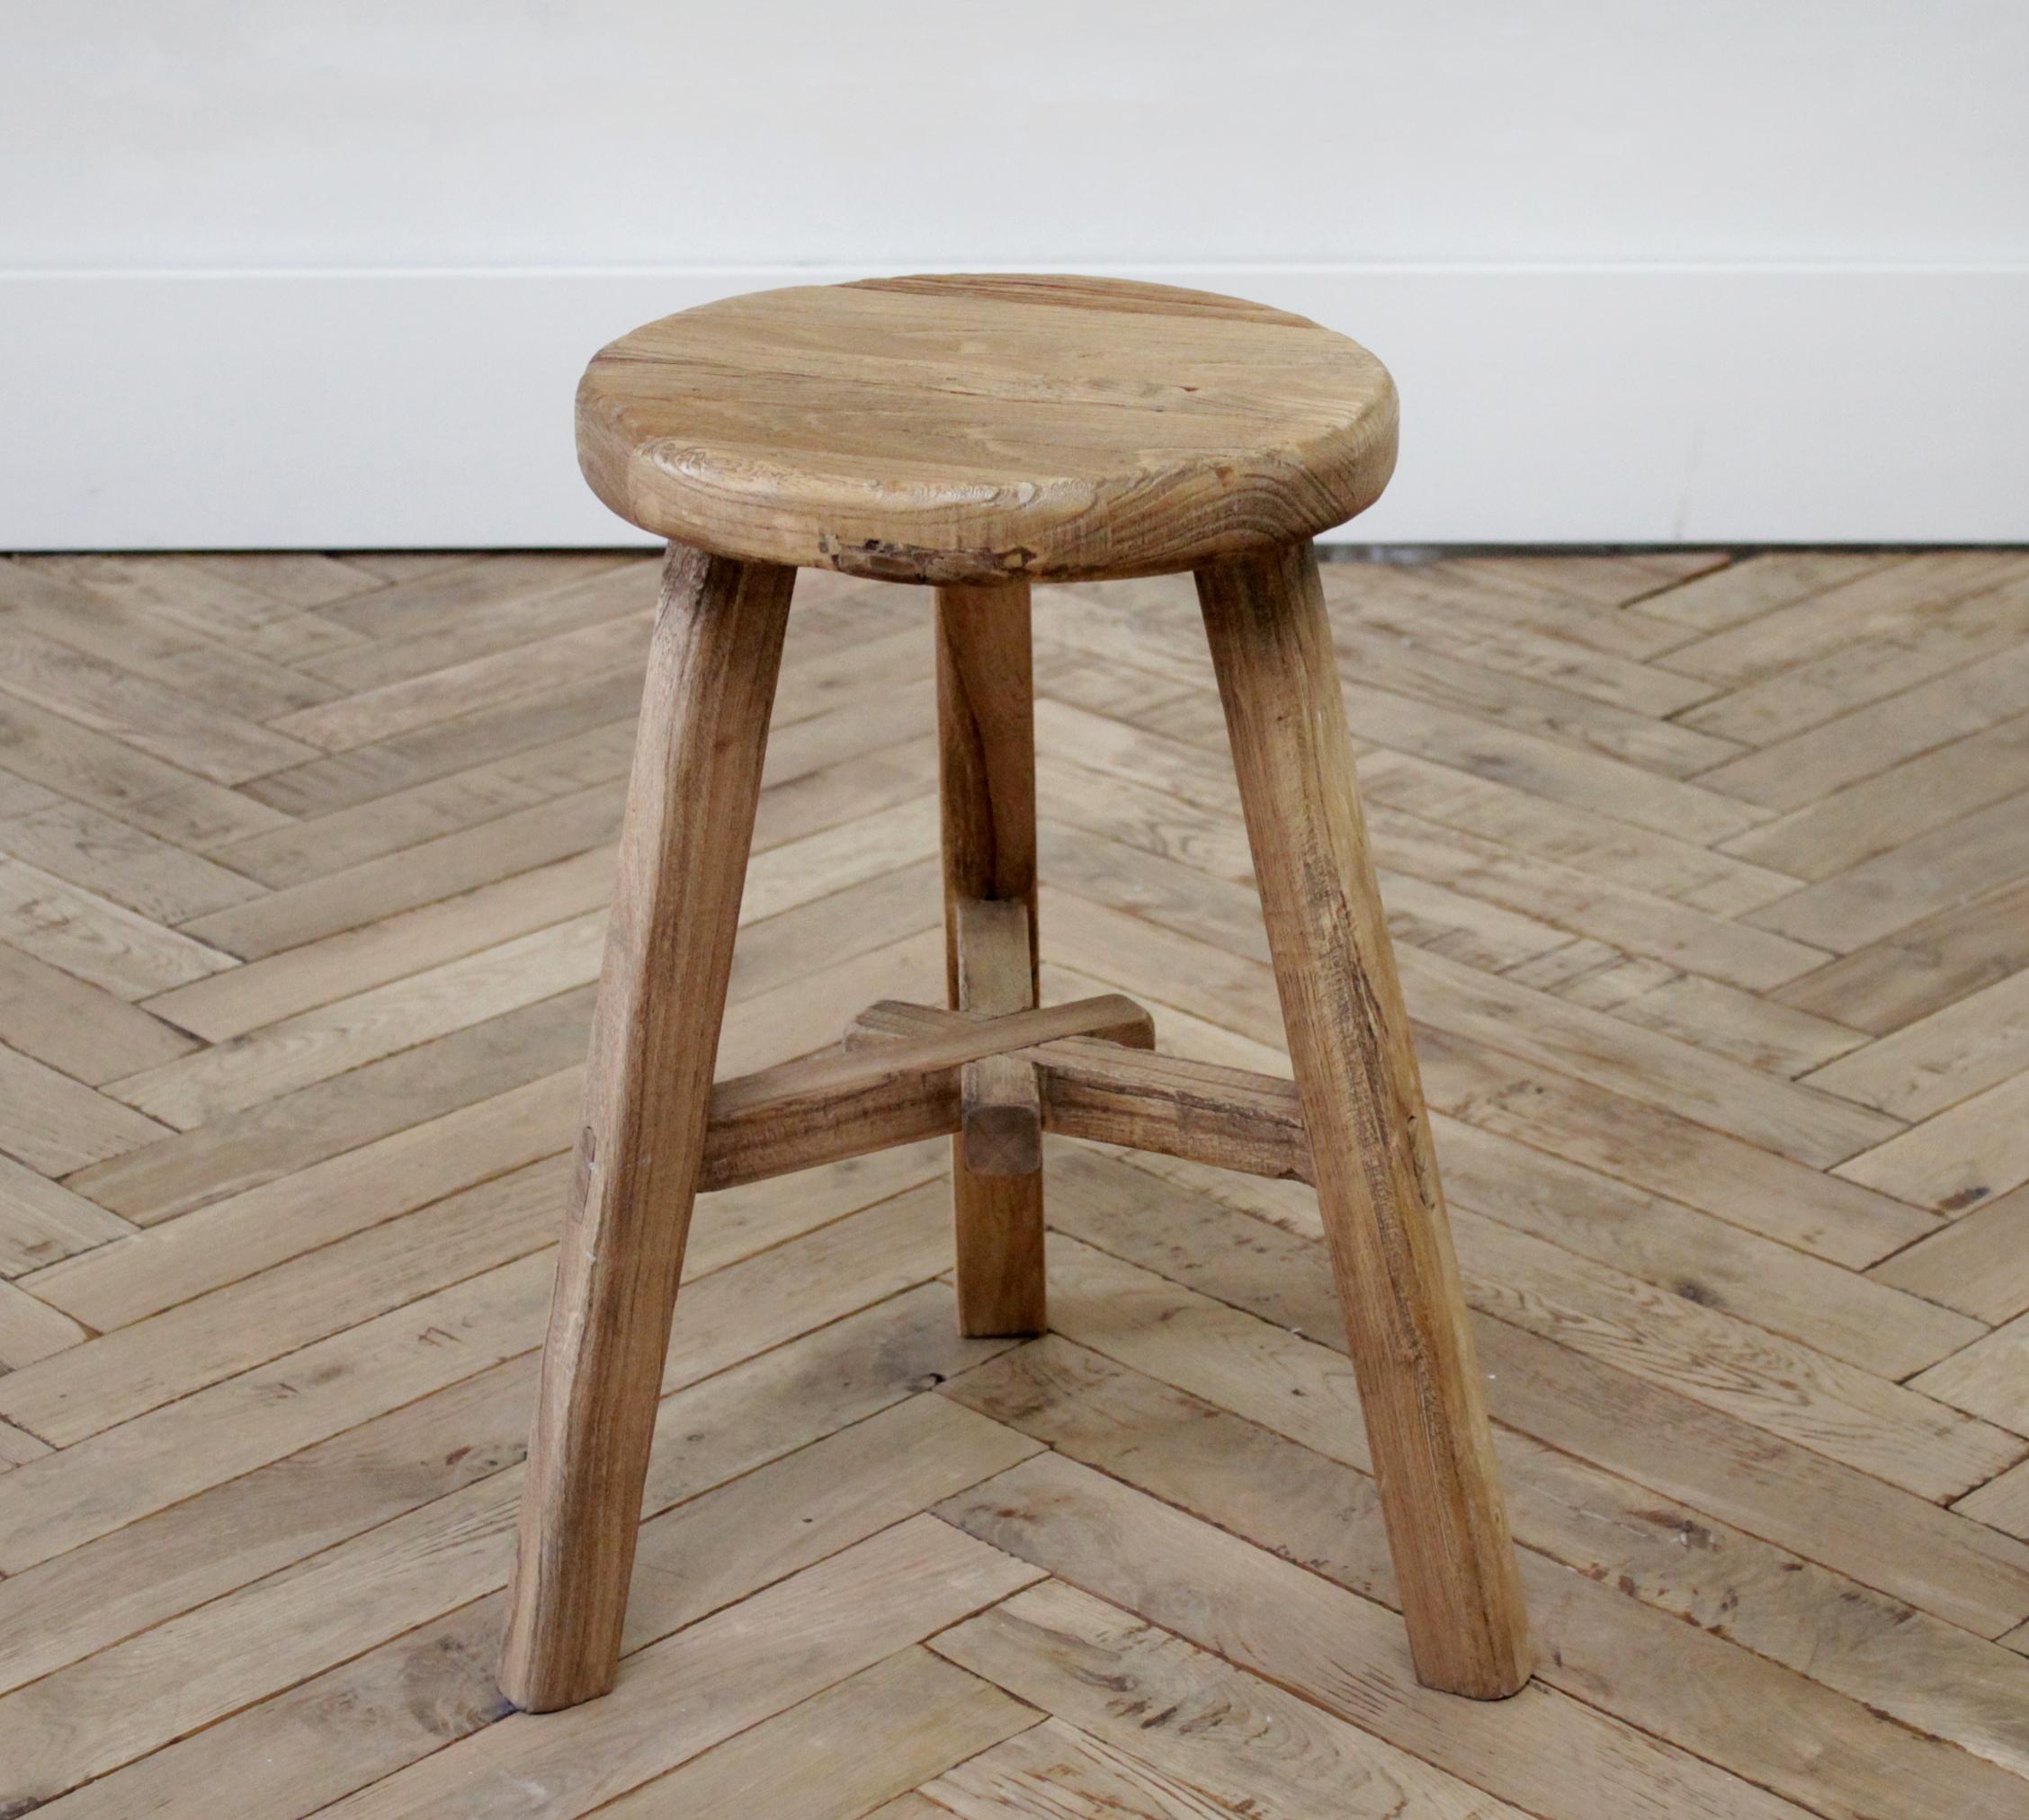 Vintage natural Chinese elm wood stool
Round seat, with tripod style legs, and unique stretchers.
Very solid and sturdy, ready for use anywhere in the house.
Measures: 11